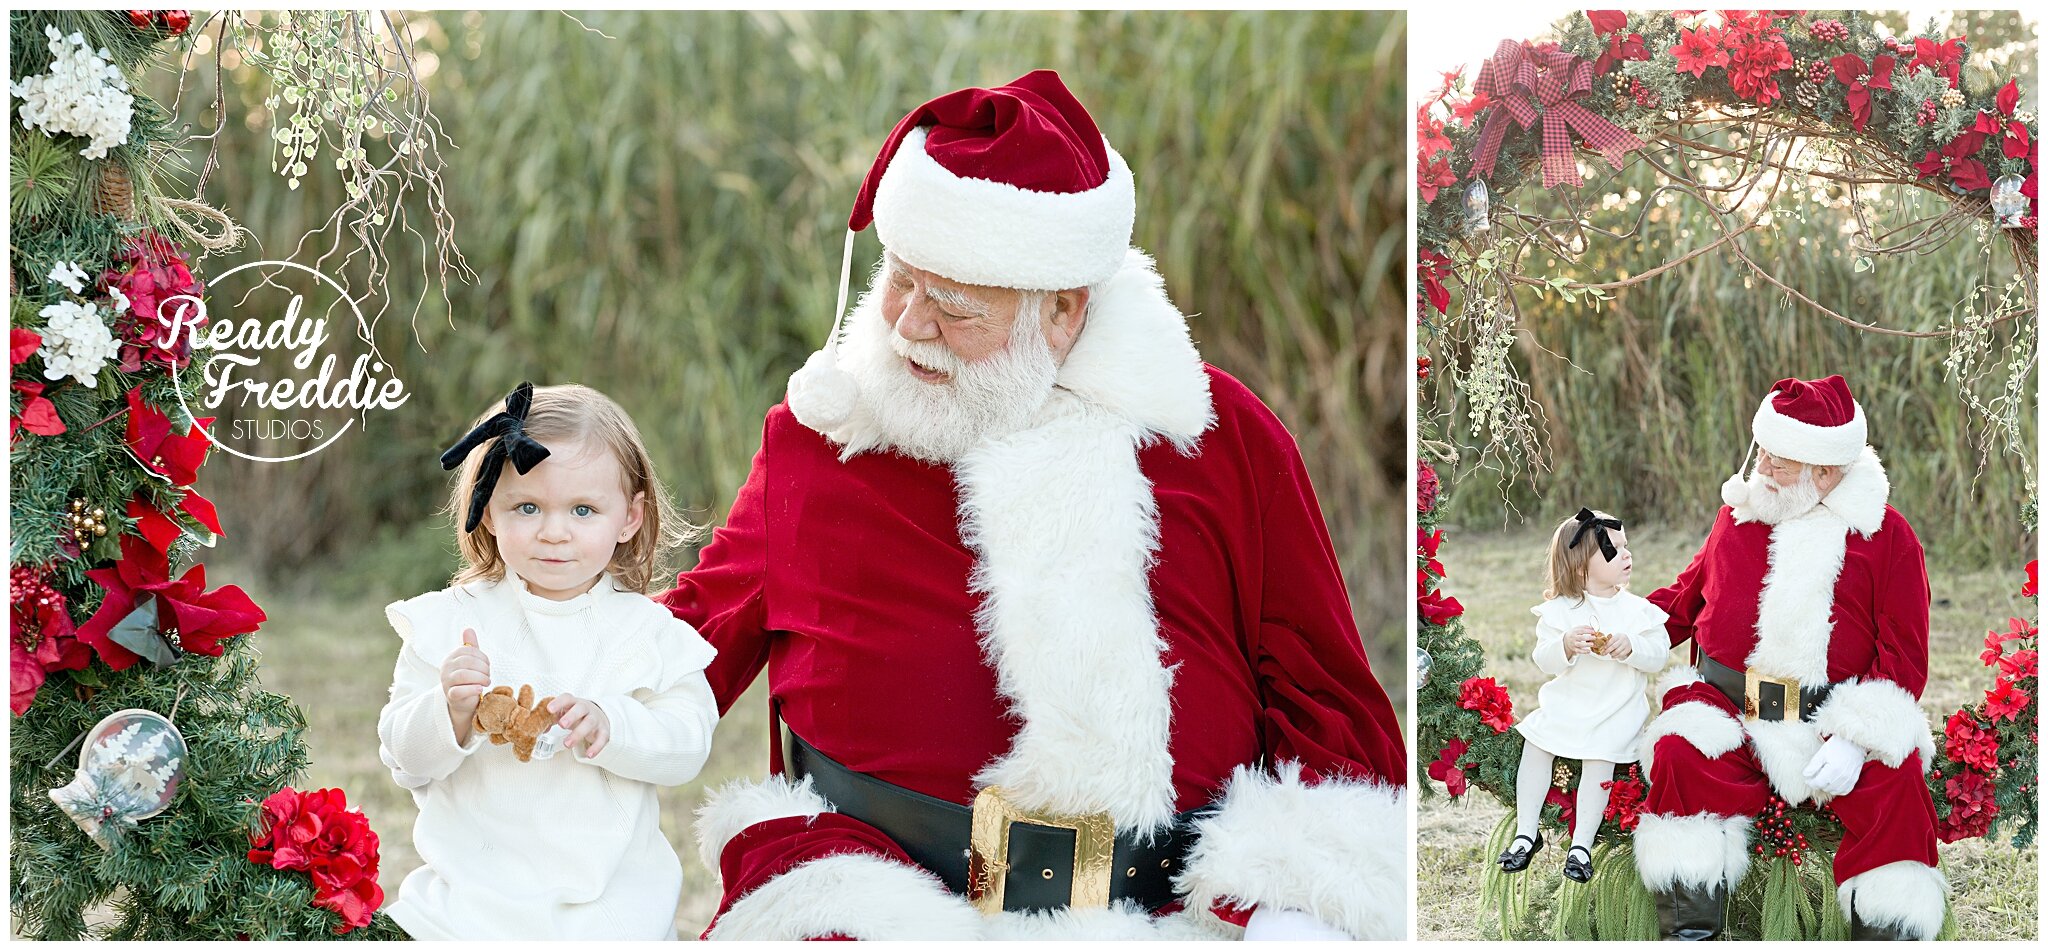 Sweetest holiday pictures with Santa | Ready Freddie Studios Miami, FL